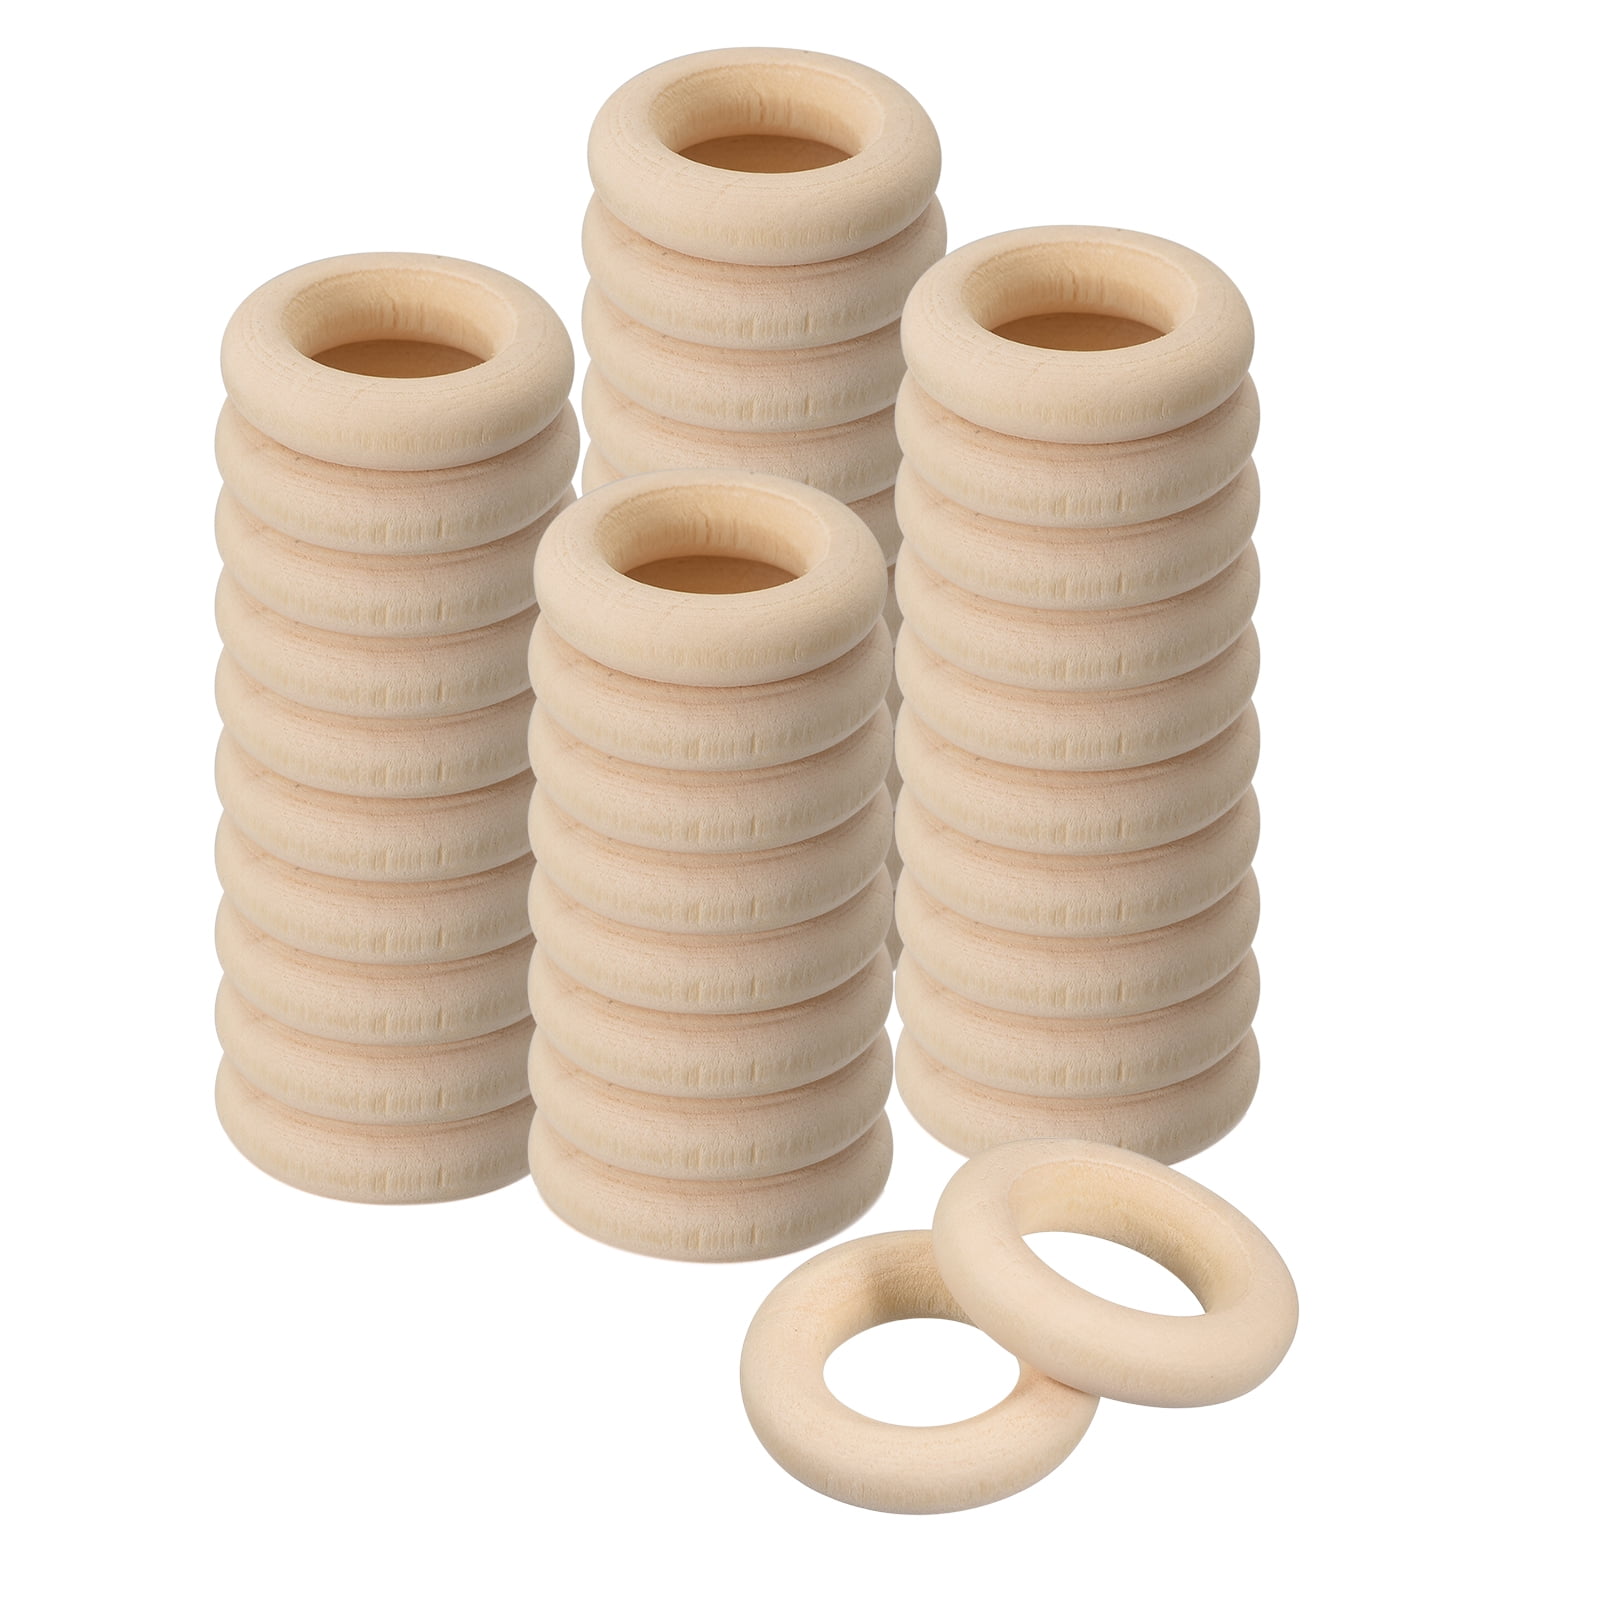 Wood Rings for Crafts 4 Inch, Pack of 10 Unfinished Wooden Rings for  Macrame and Jewelry-making, by Woodpeckers